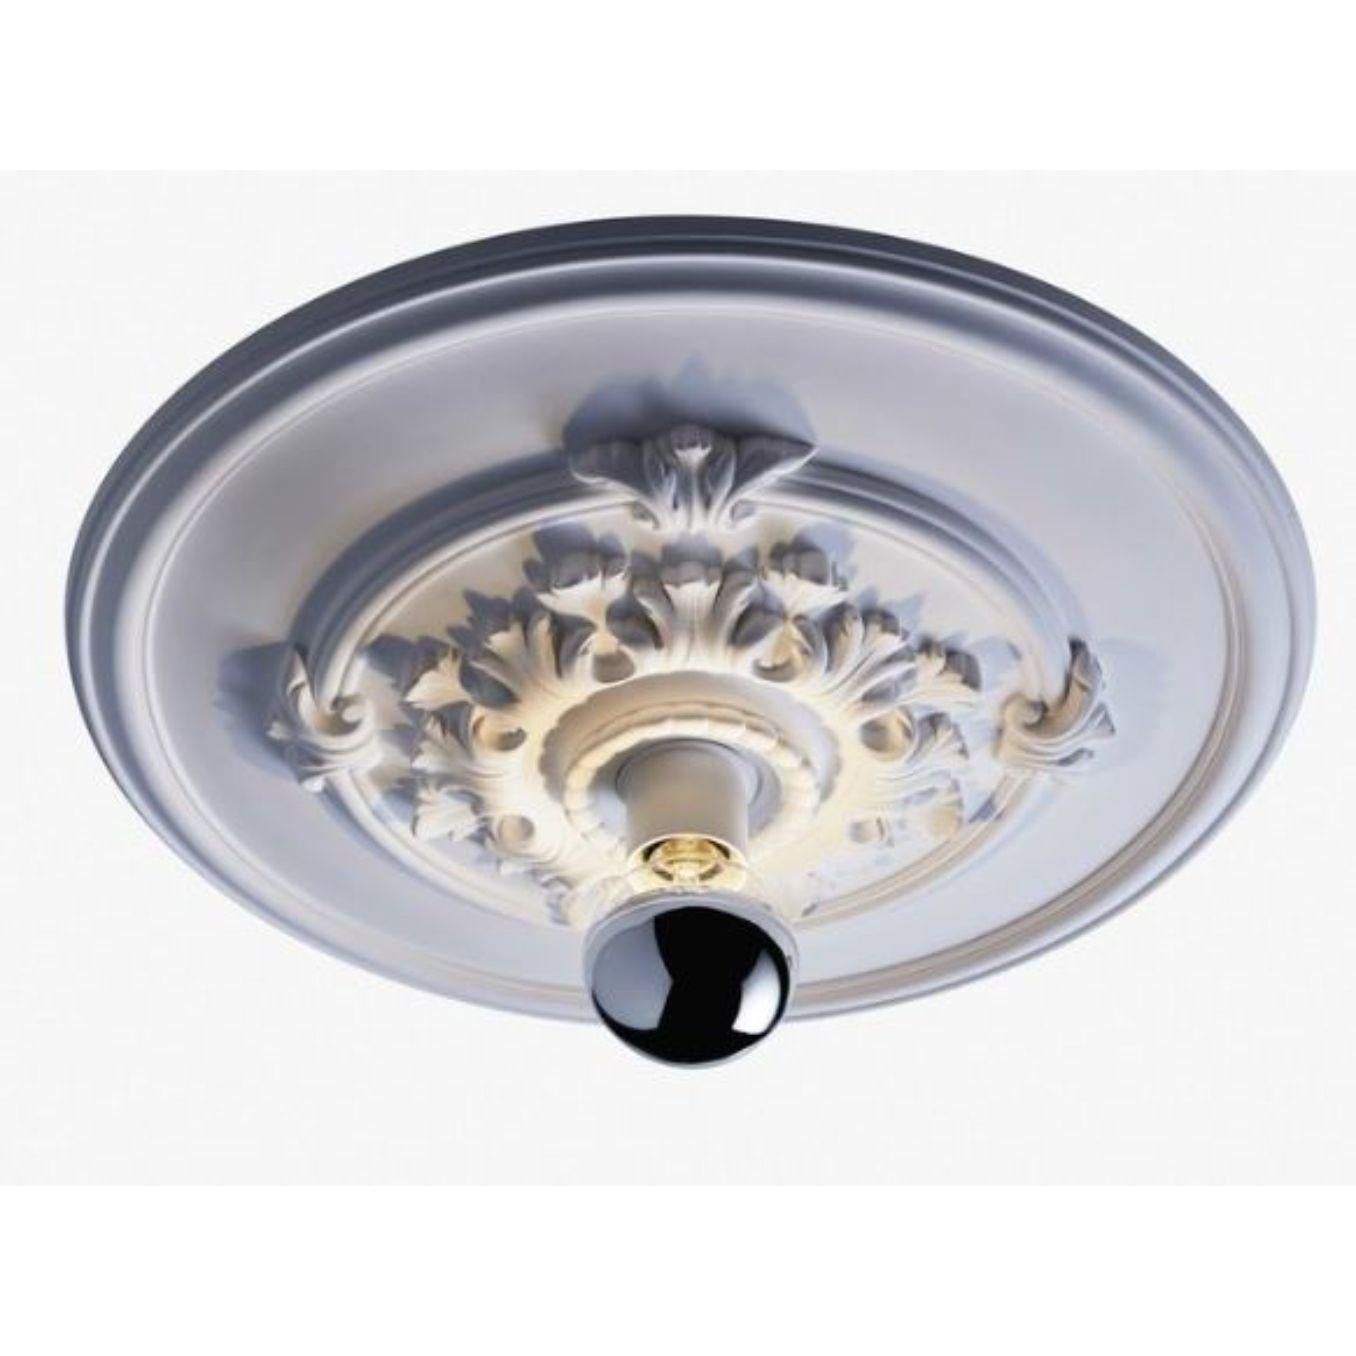 Rivoli ceiling light by RADAR
Design: Bastien Taillard
Materials: Metal, plaster of Paris, fiberglass.
Dimensions: W 60 x D 60 x H 15 cm
Also available with a double layer of mat white paint or in raw plaster ready to paint. Bulb socket